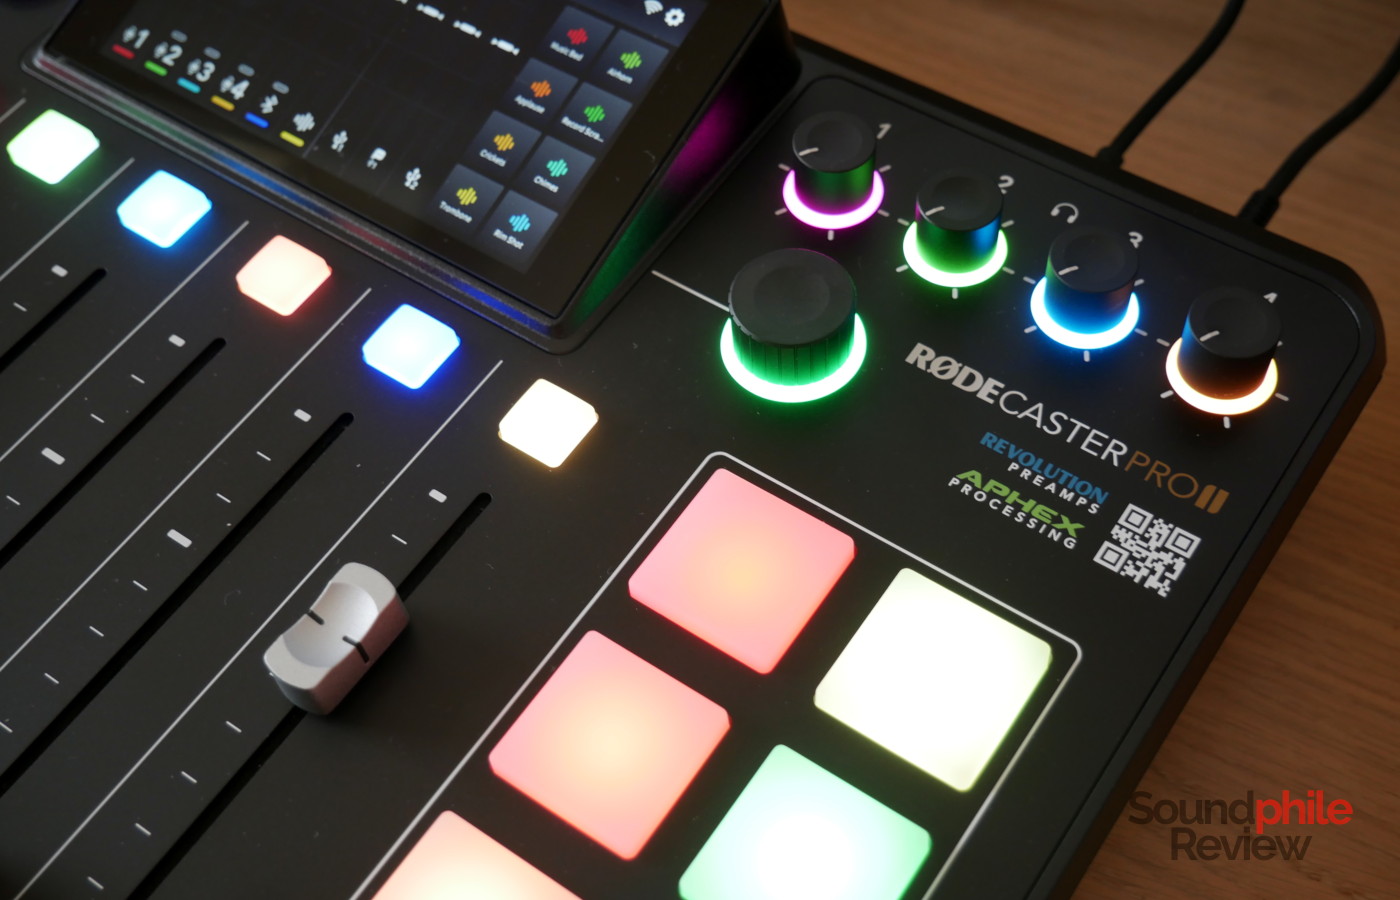 Rode Rodecaster Pro II